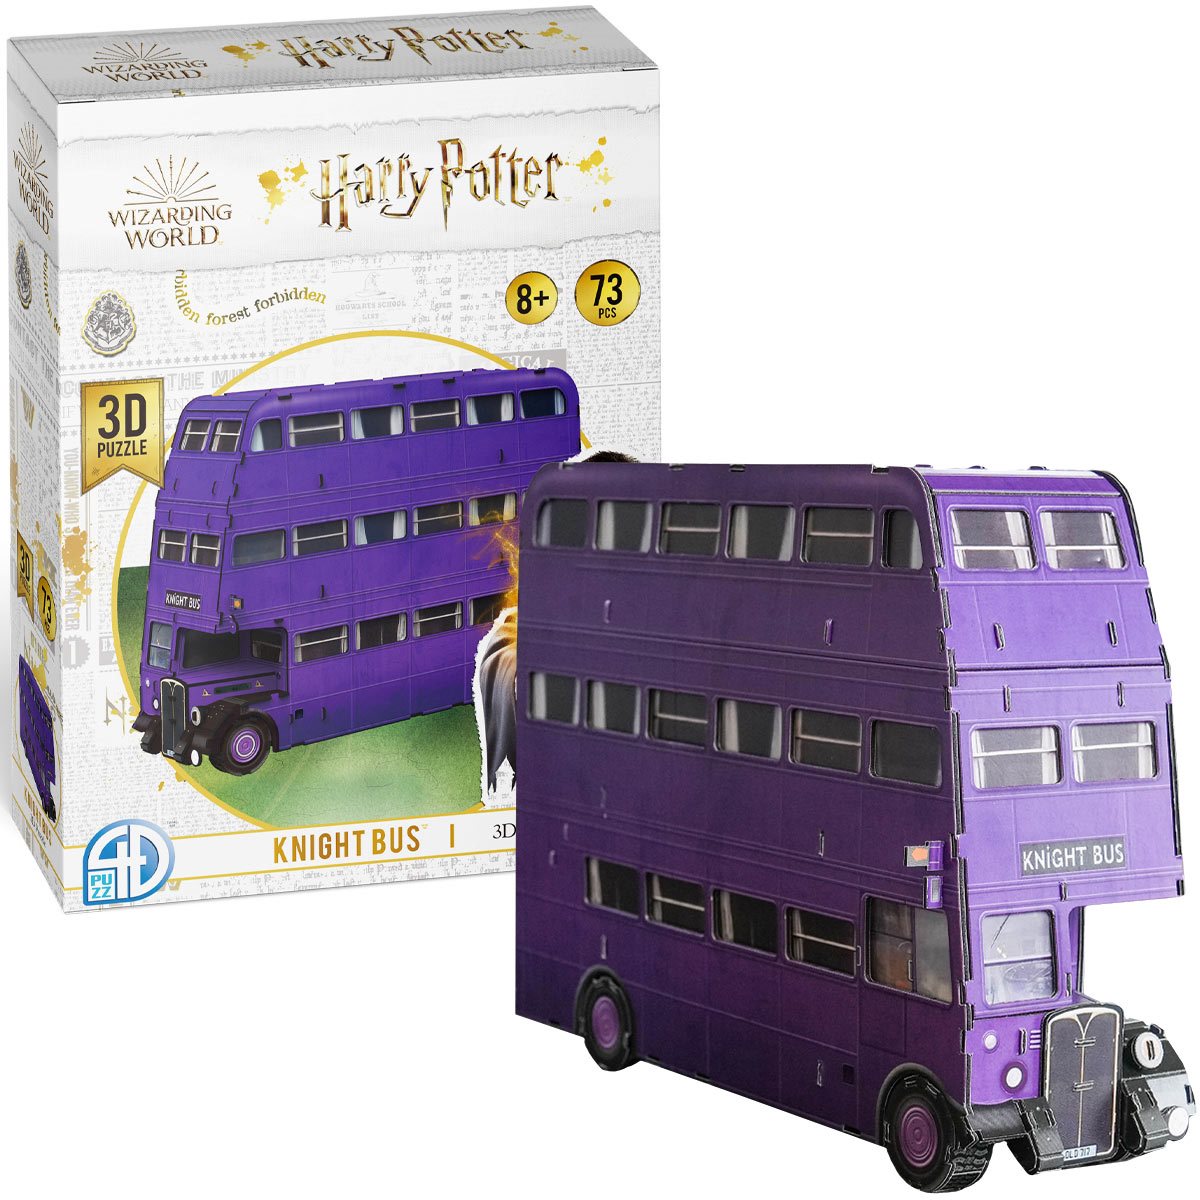 Wizarding World 51073 Harry Potter The Knight Bus 3D Model Puzzle Kit